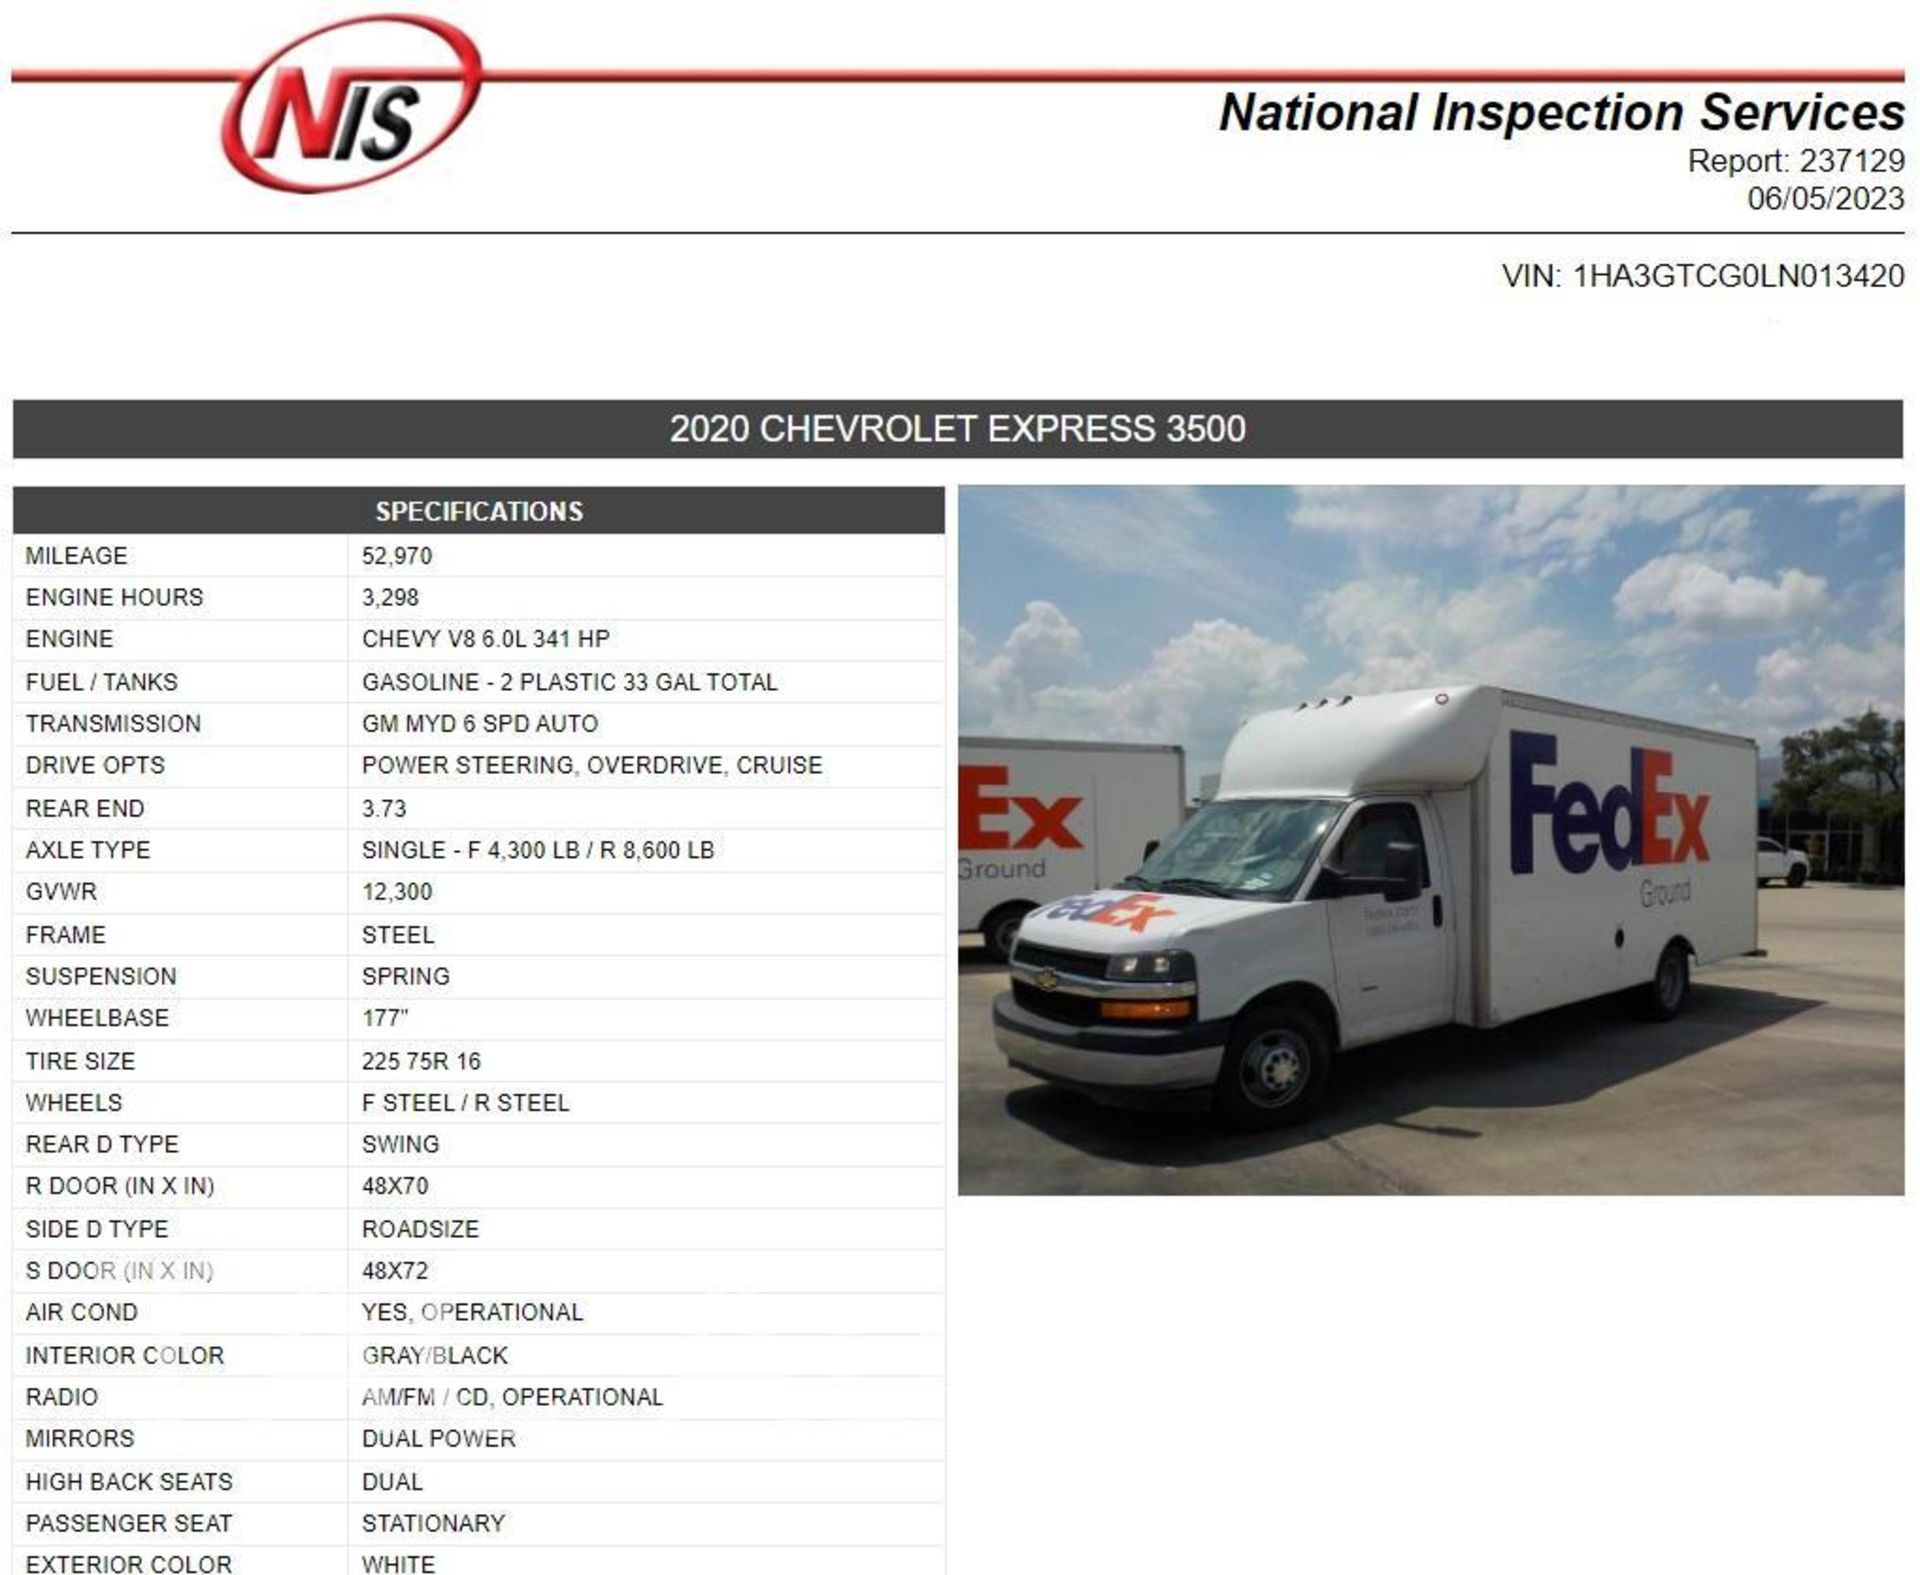 2020 Chevrolet Express 3500 16ft Box Truck - Image 87 of 94